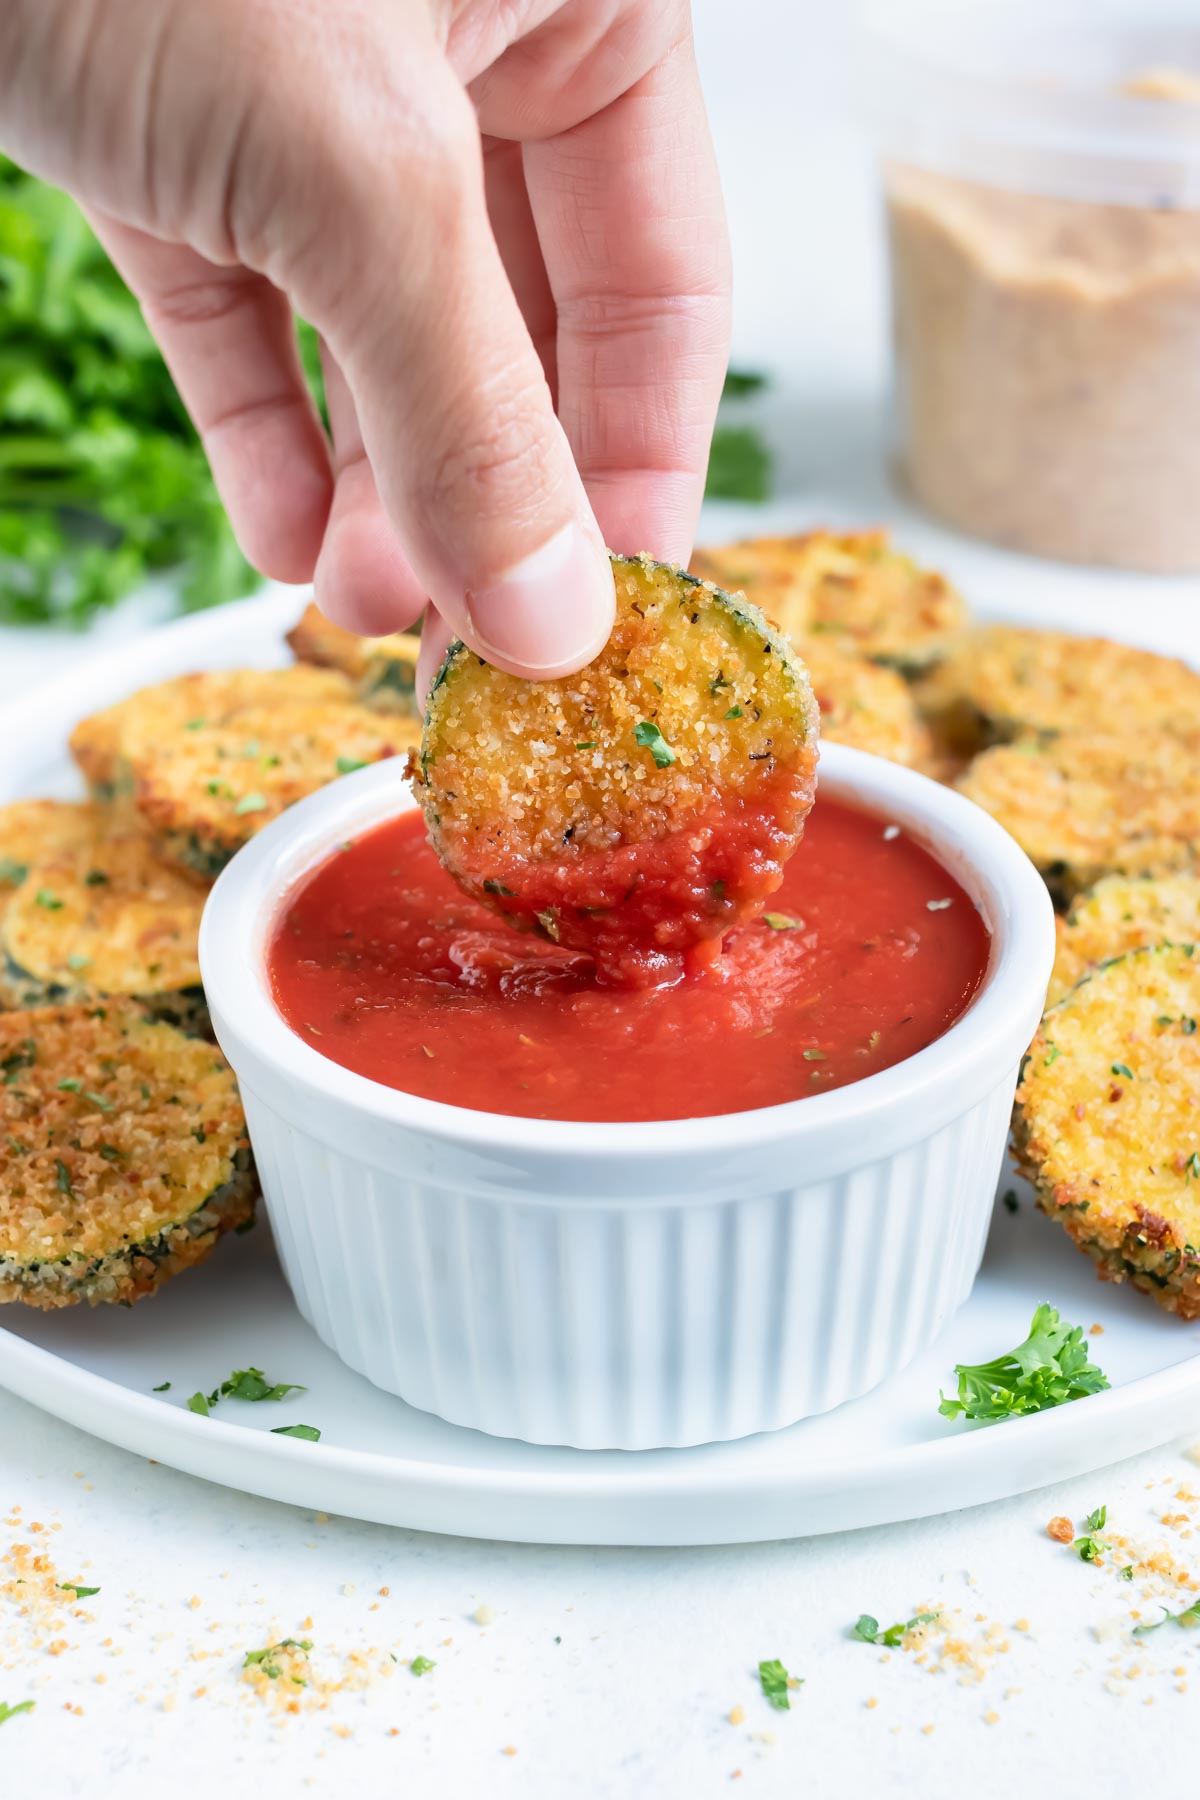 Air Fryer zucchini chips are dipped into a cup of marinara sauce.